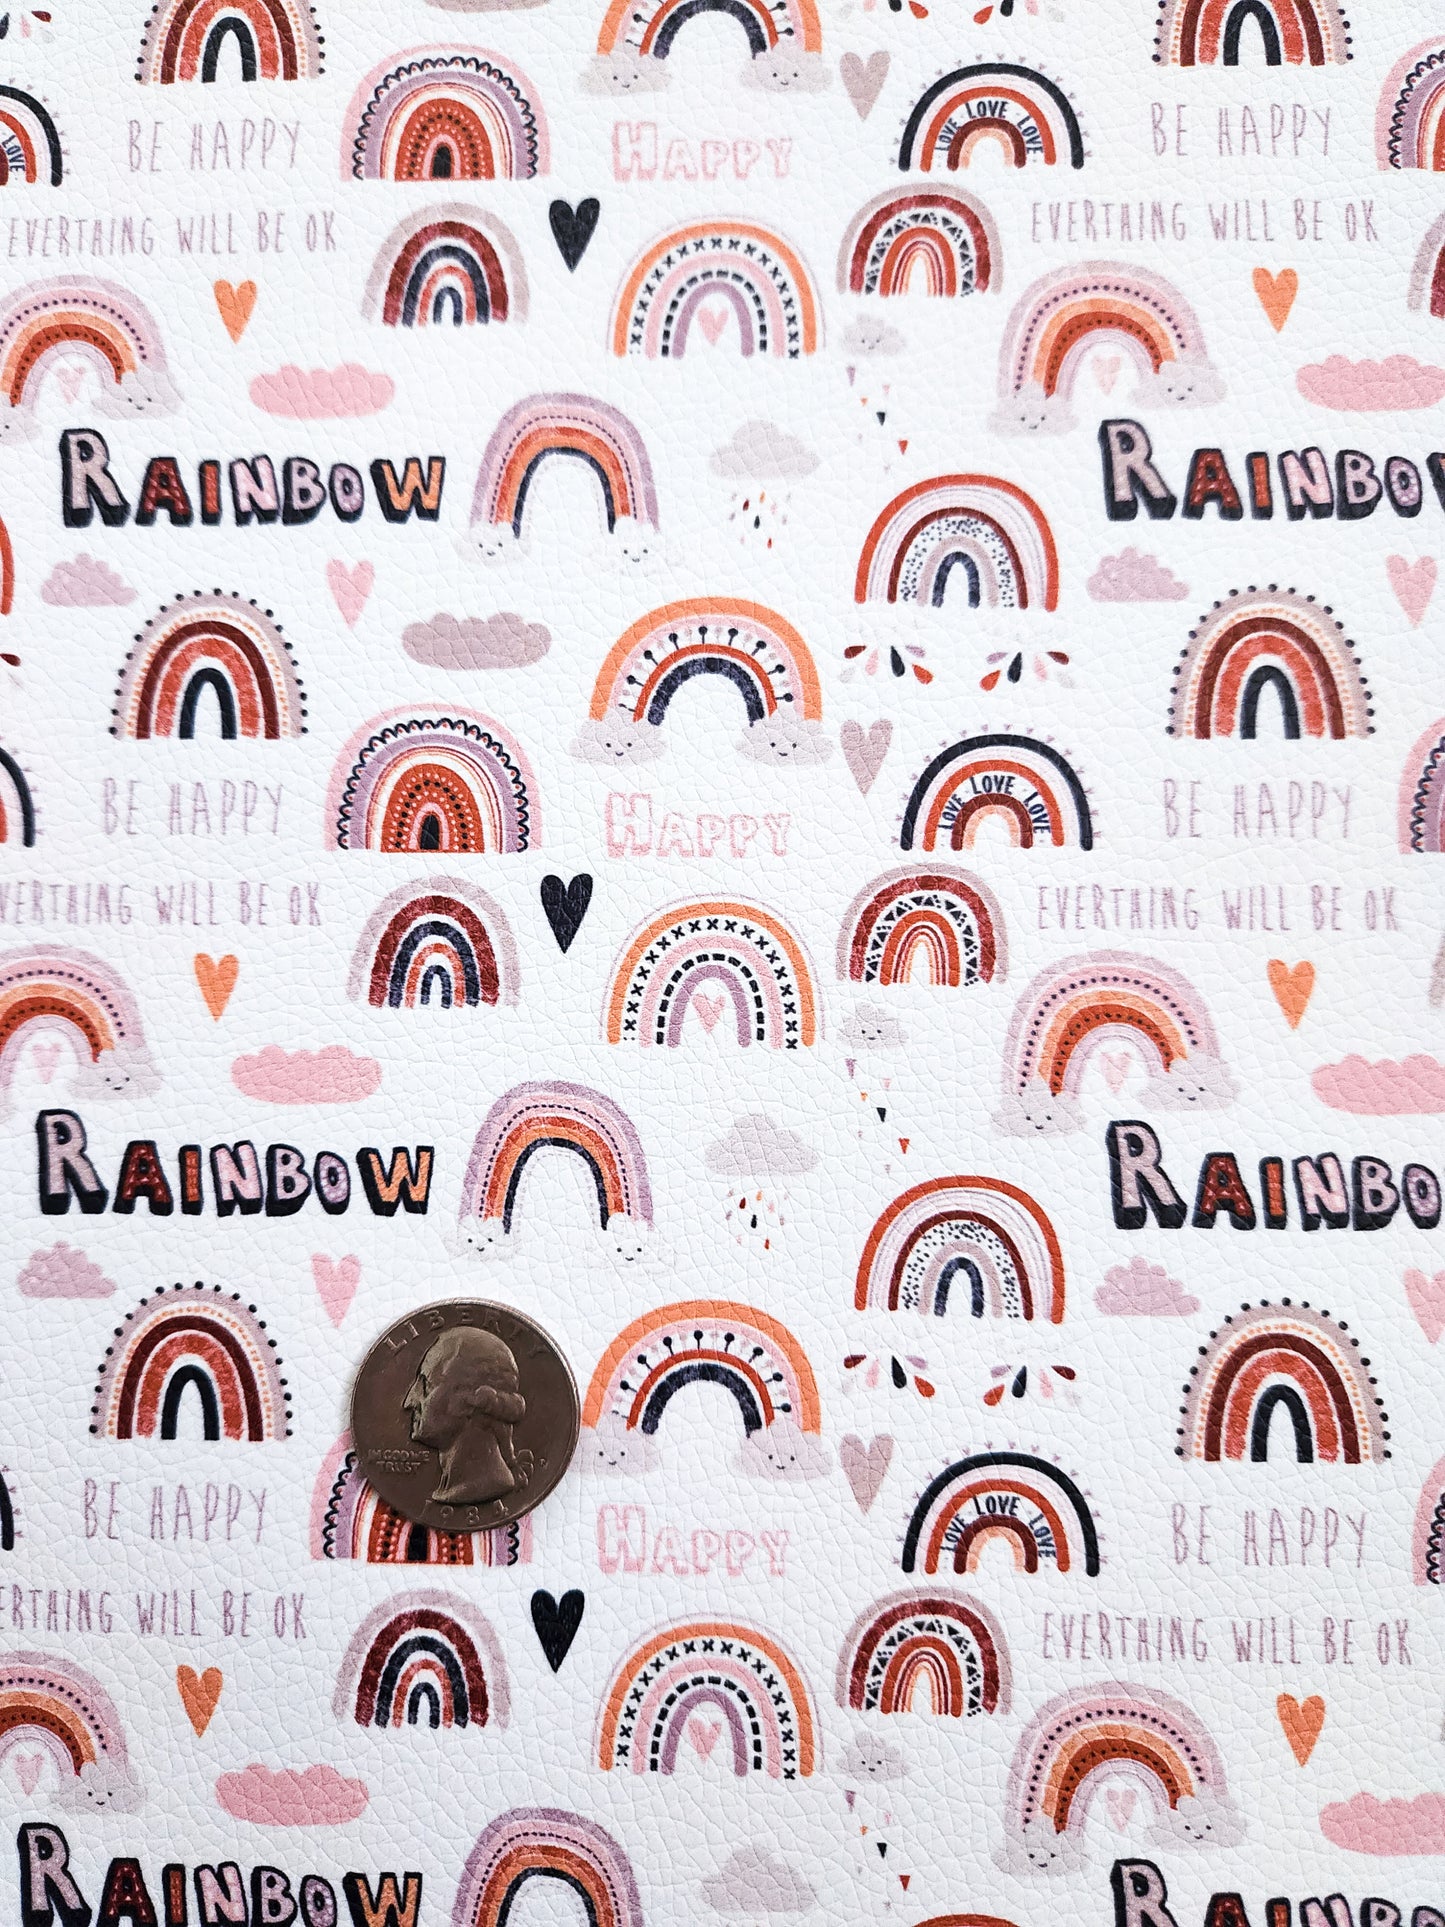 Happy Rainbows 9x12 faux leather sheet